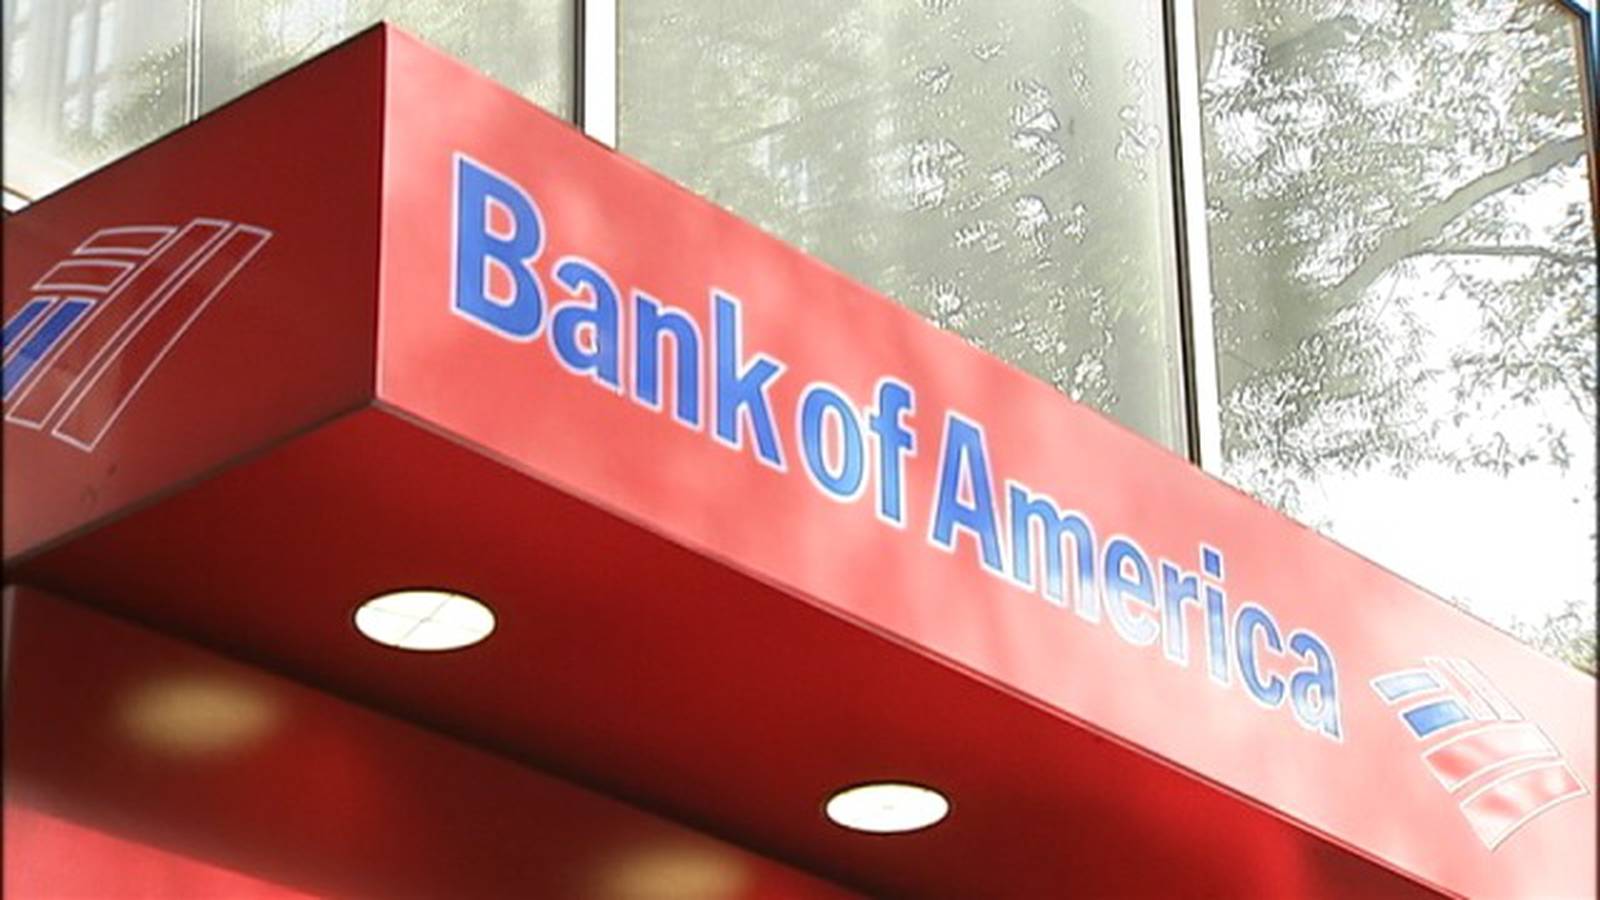 More layoffs for Bank of America WSOC TV